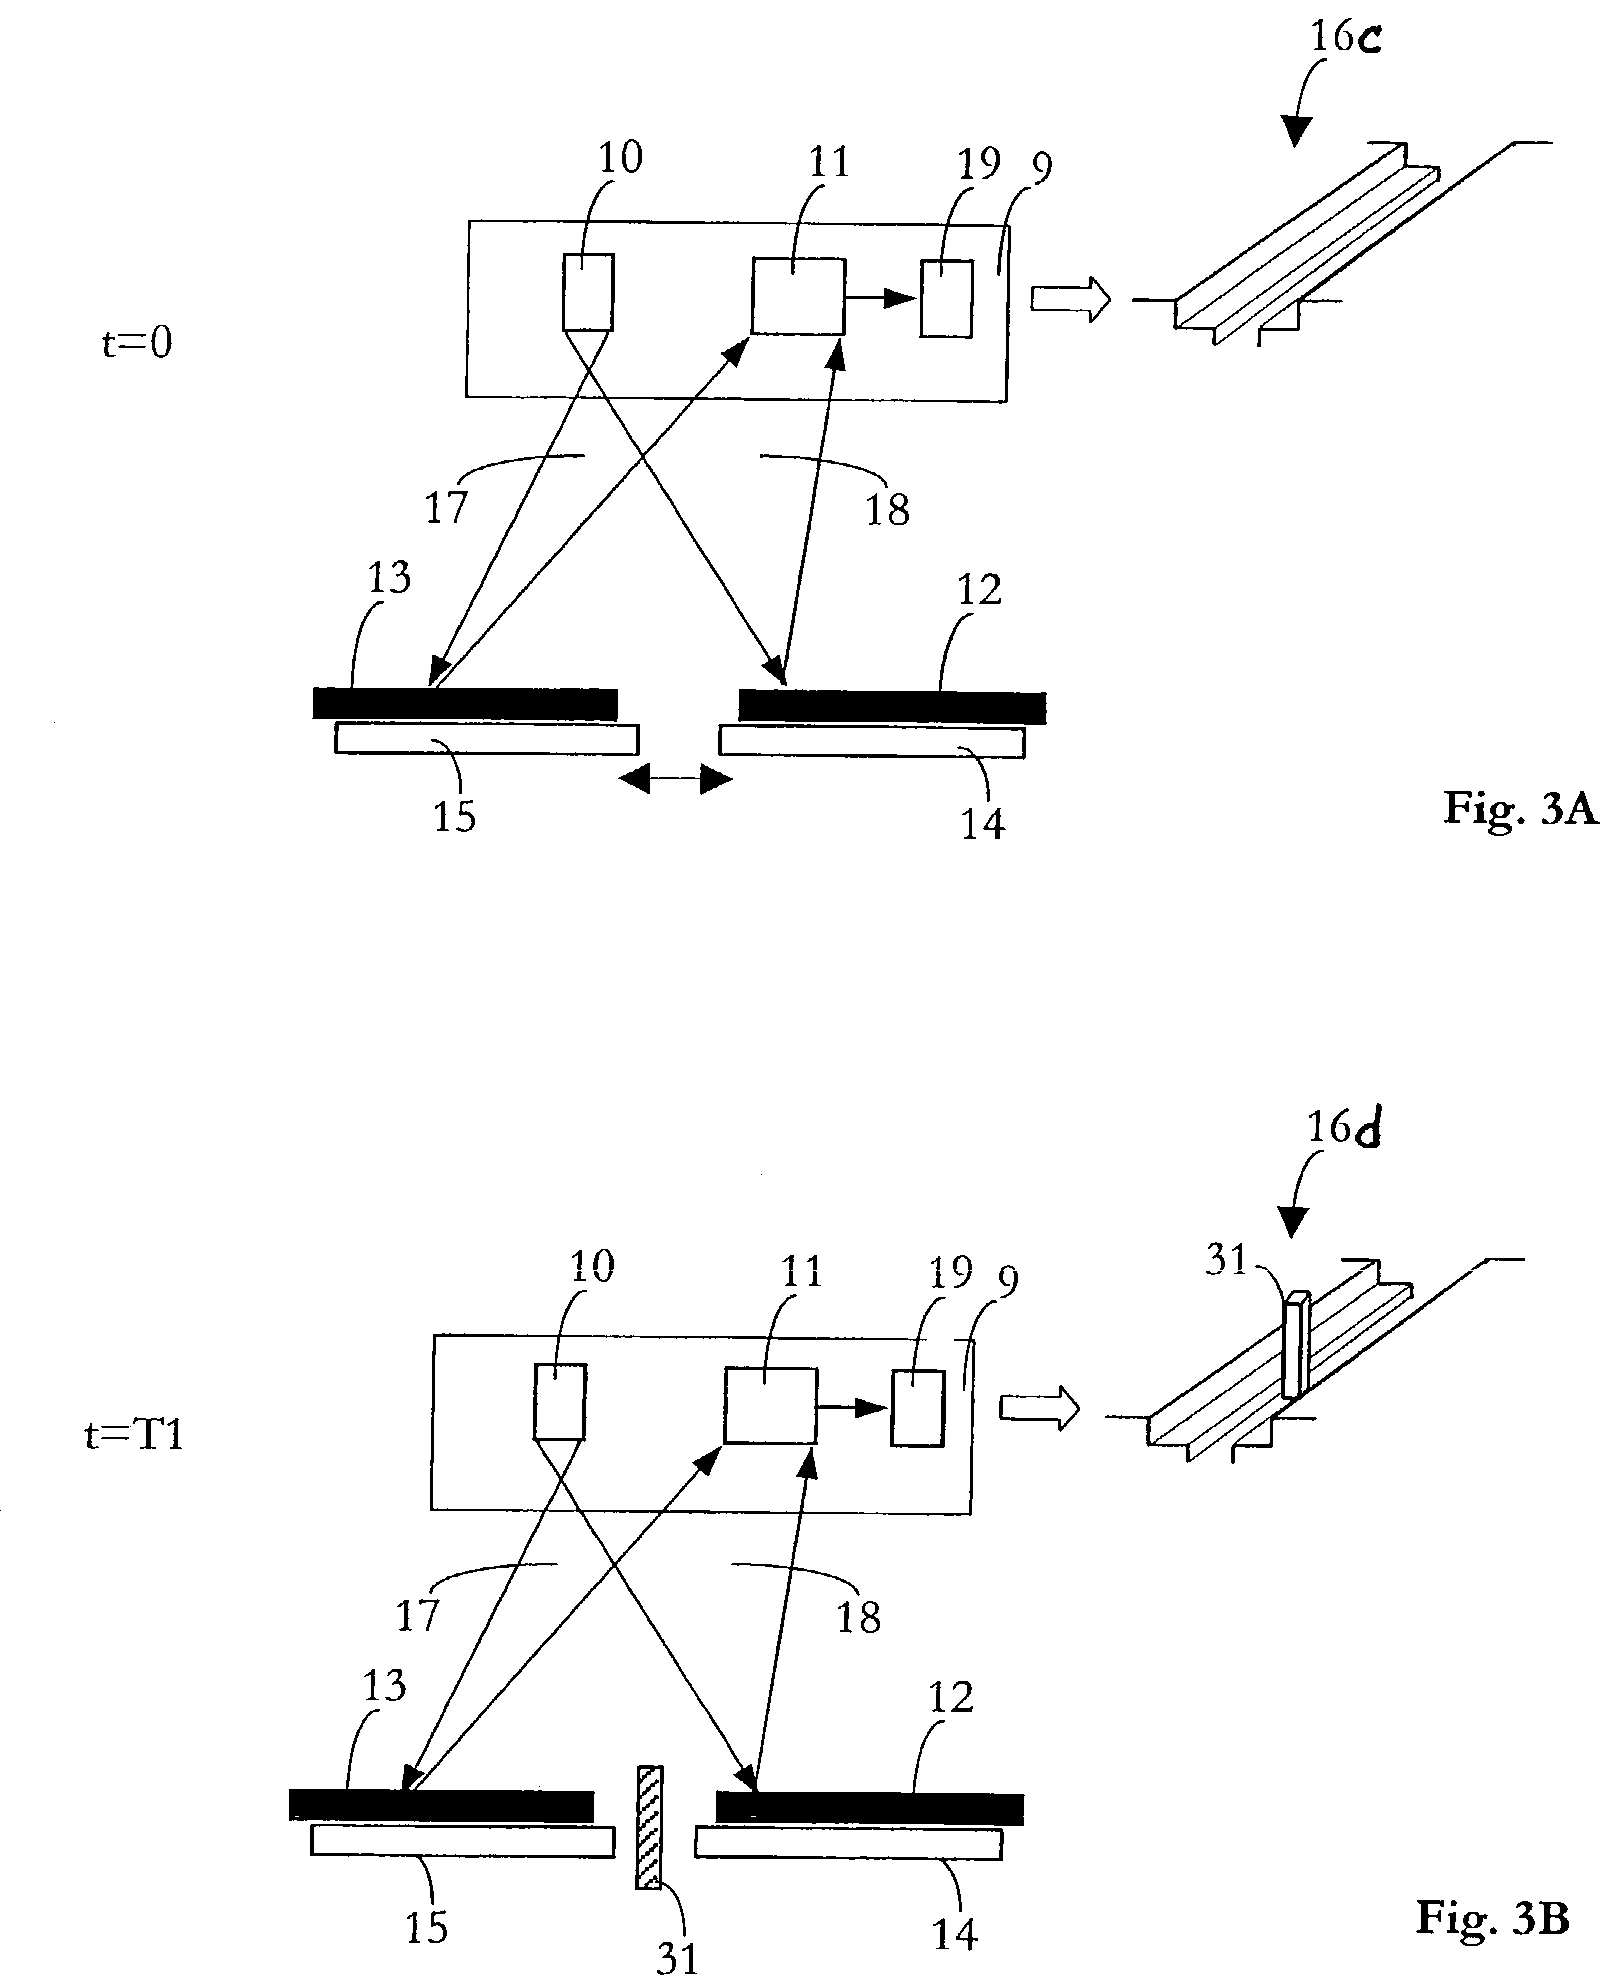 Door state monitoring by means of three-dimensional sensor